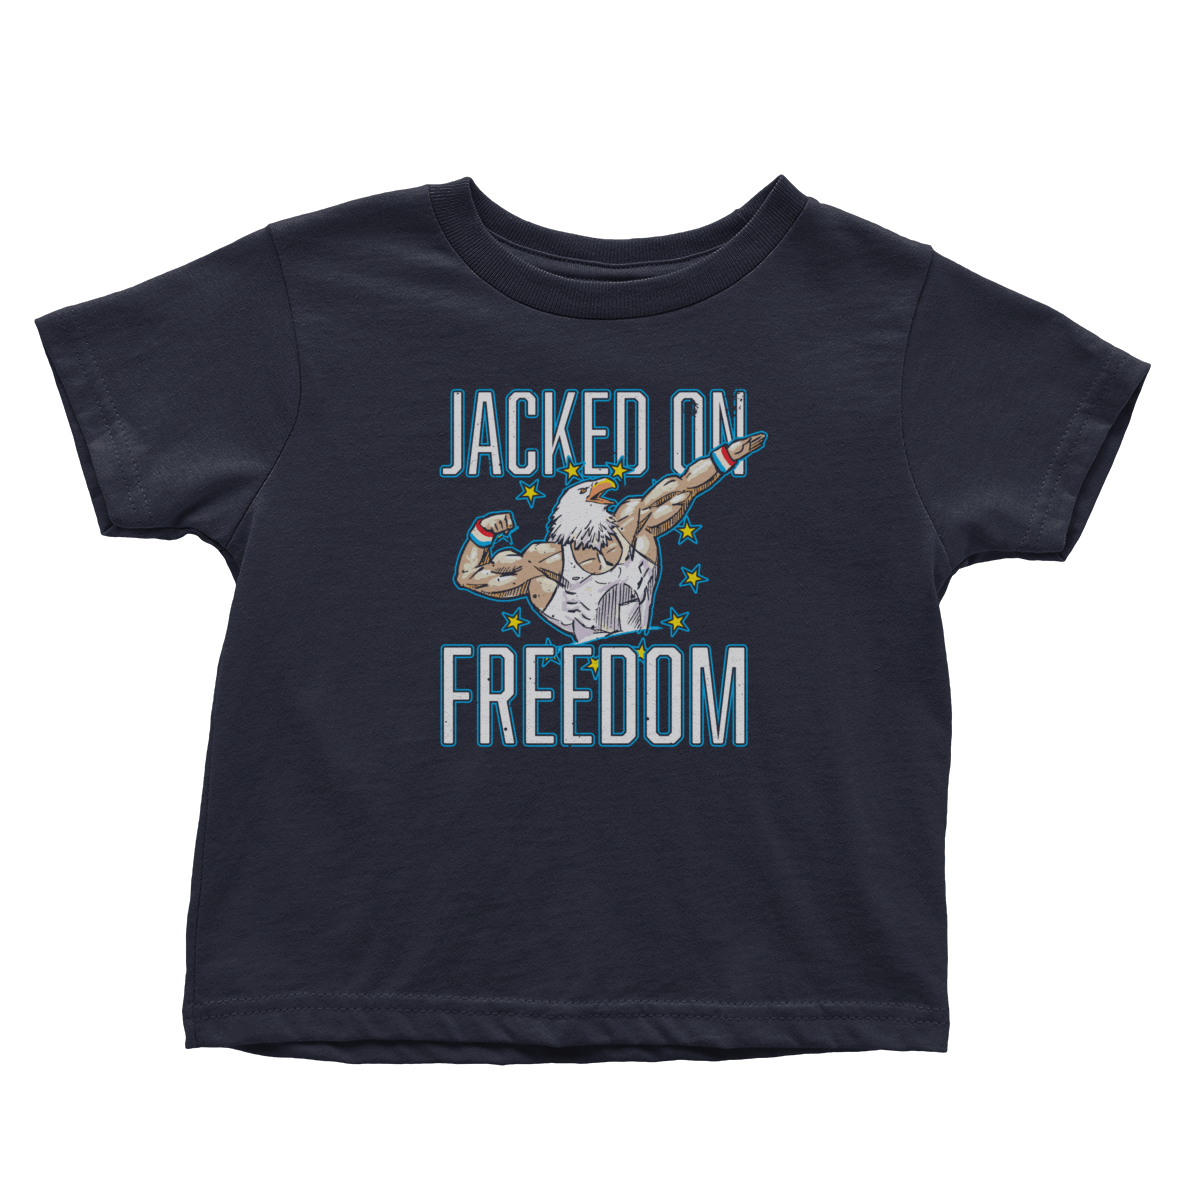 Apparel Premium Toddler Shirt / Navy / 2T Jacked on Freedom - Toddlers